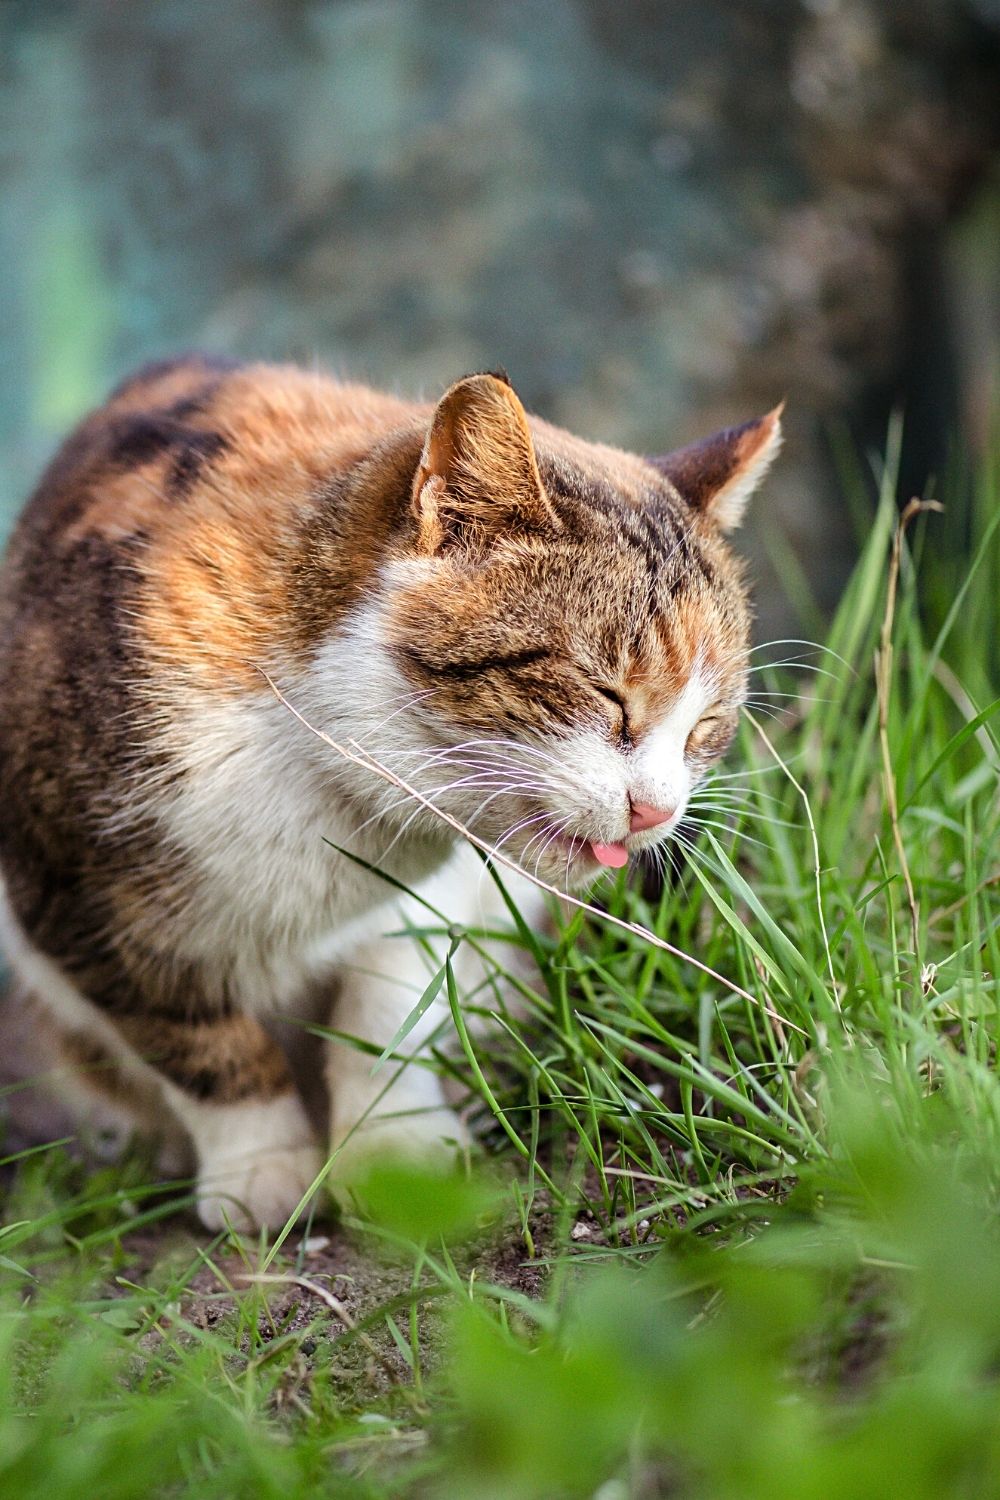 One reason cats sleep outside is that they're allowed to roam